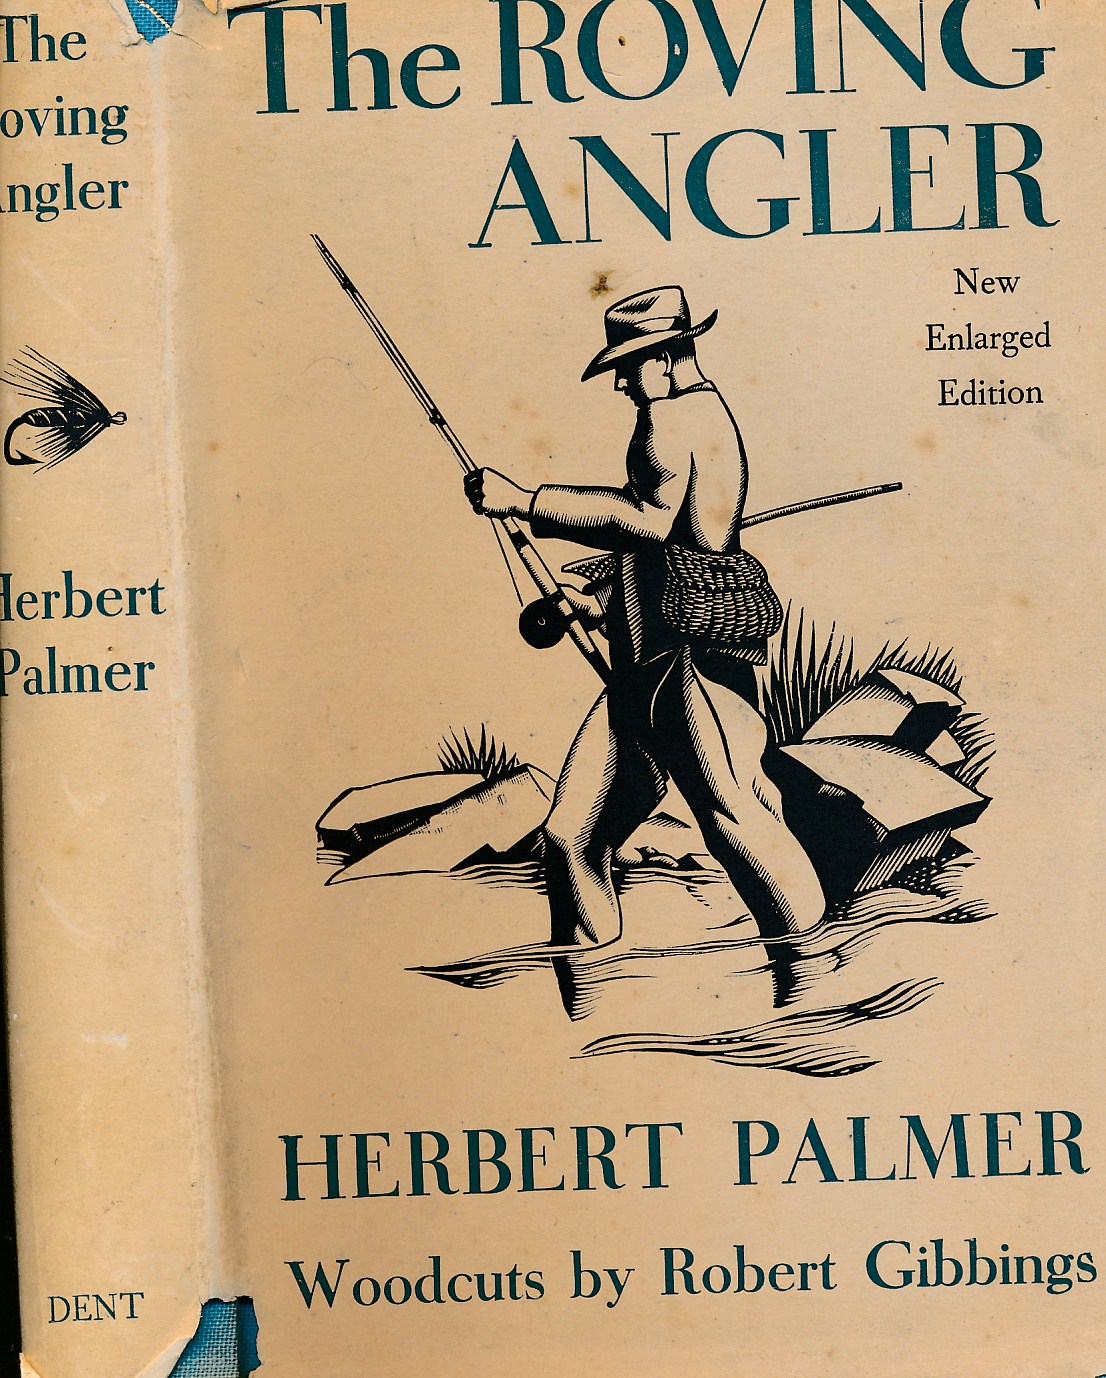 The Roving Angler